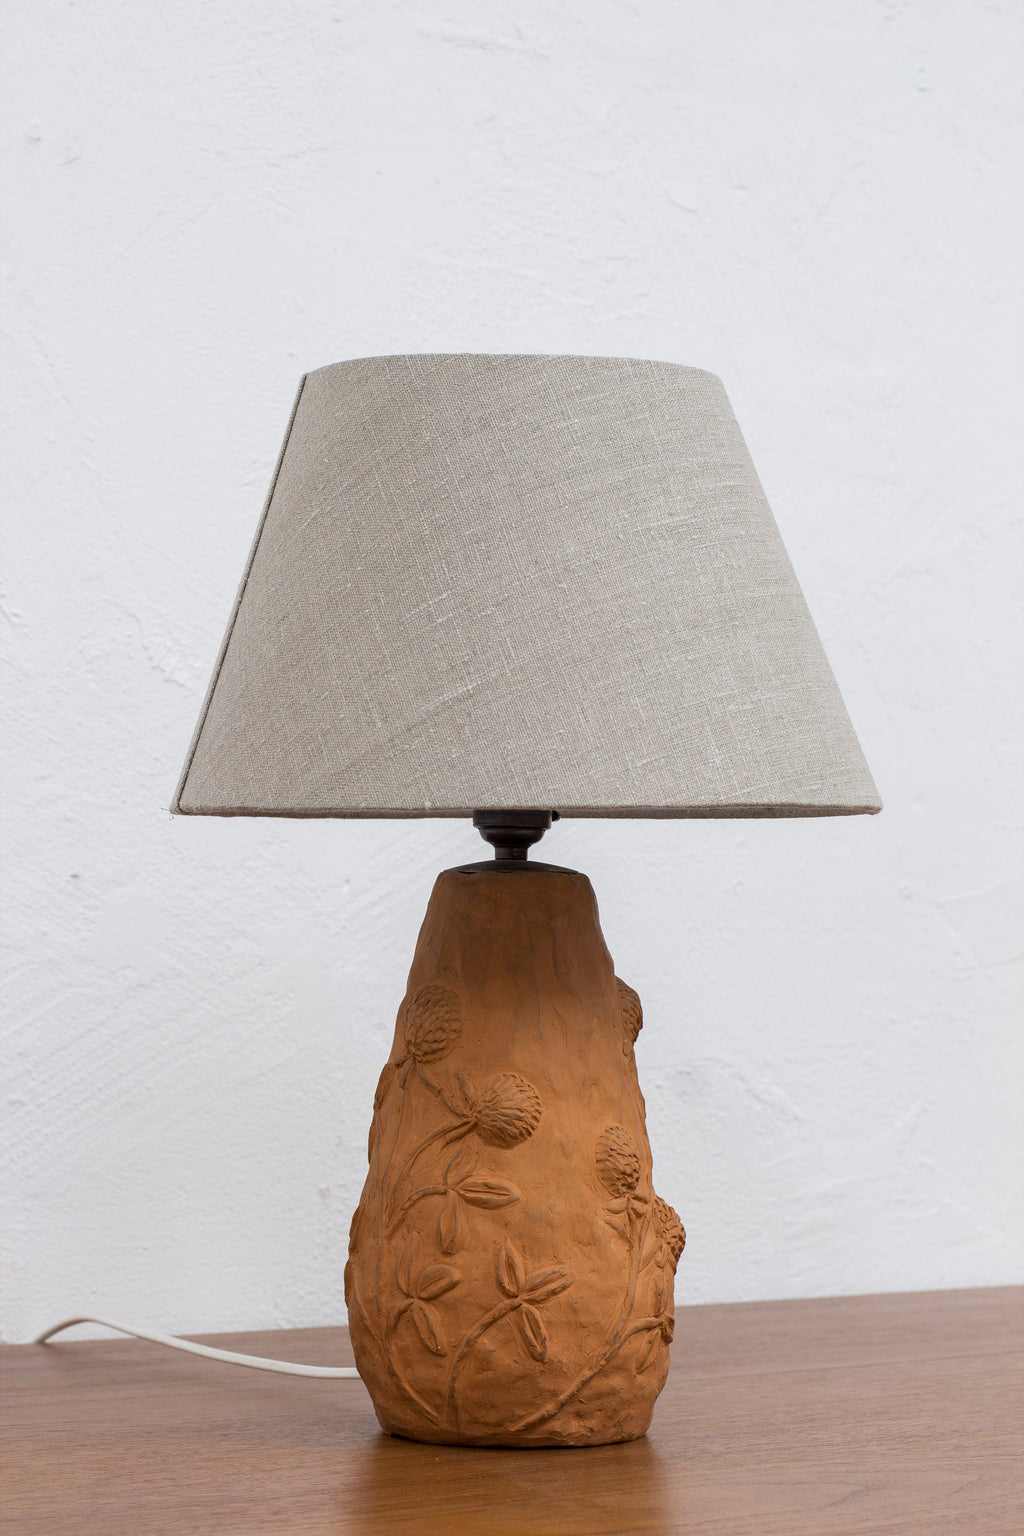 Unique red clover table lamp